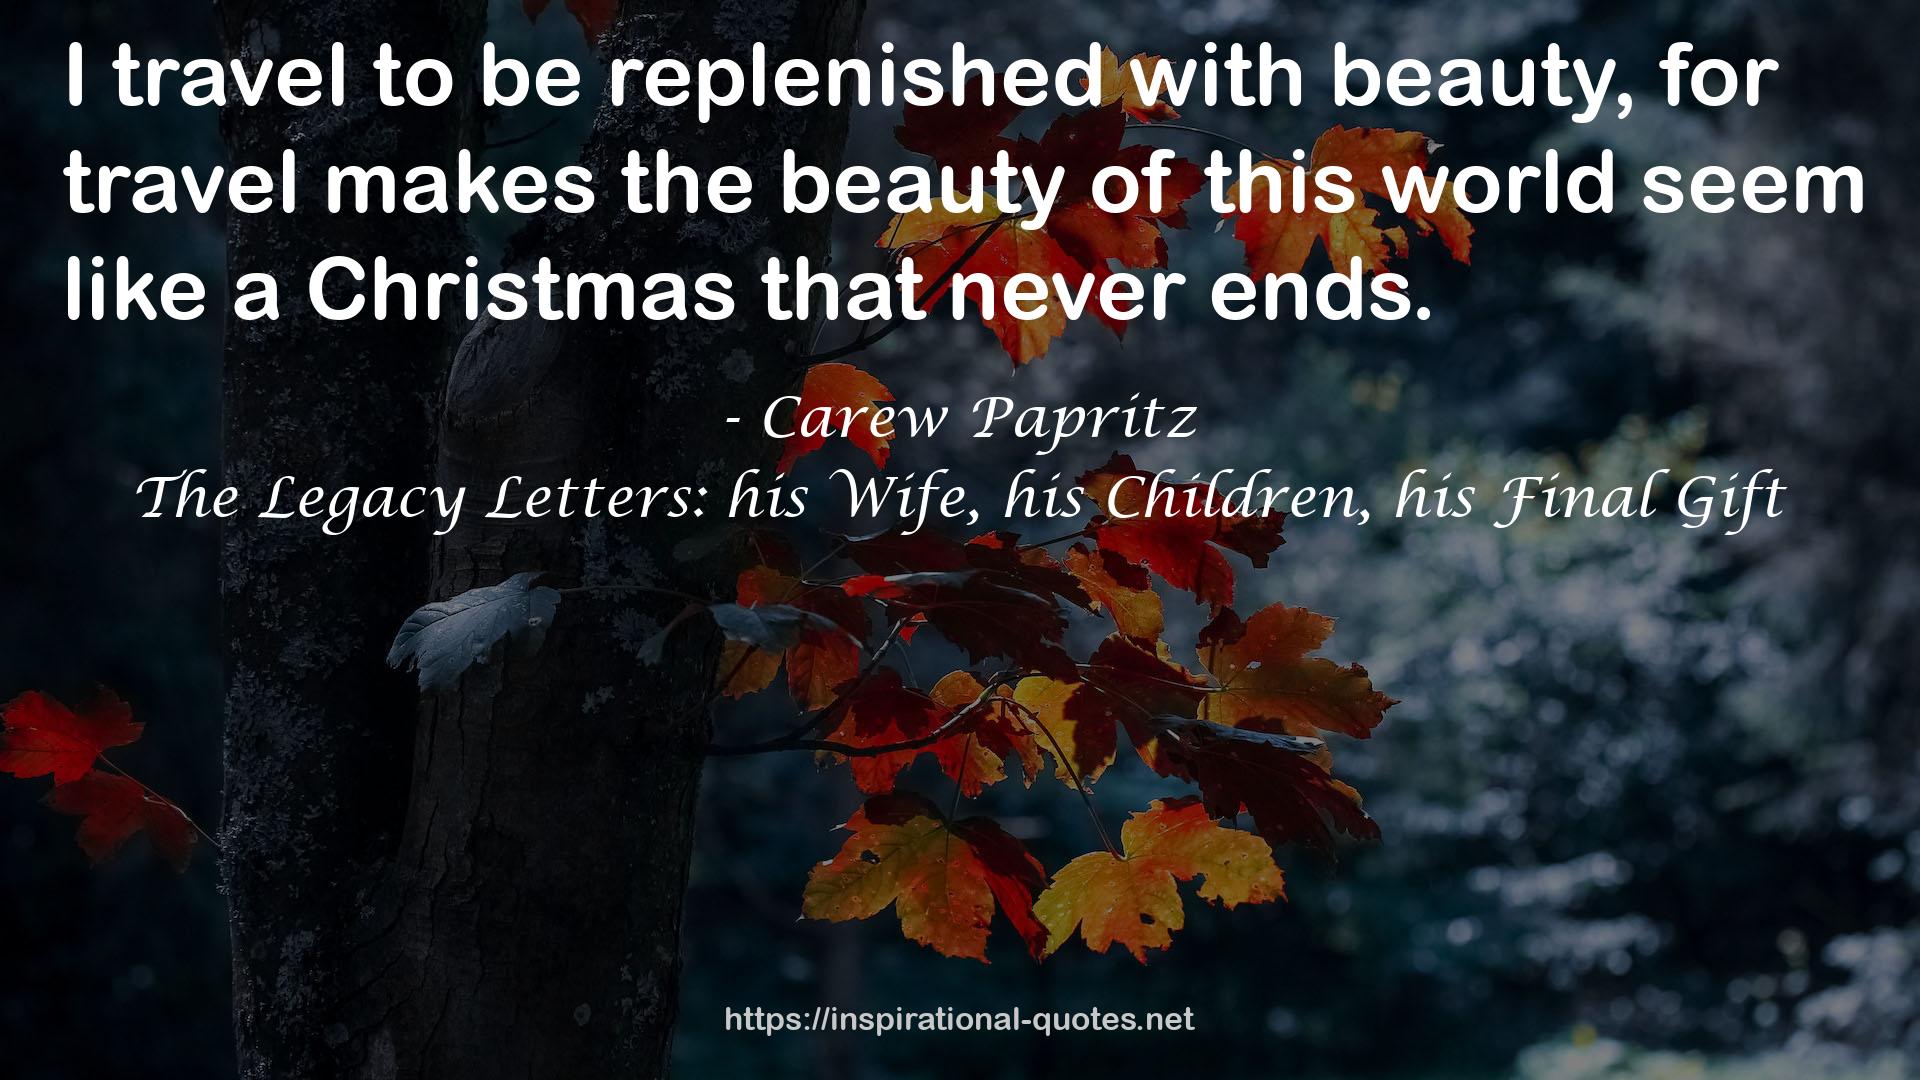 The Legacy Letters: his Wife, his Children, his Final Gift QUOTES